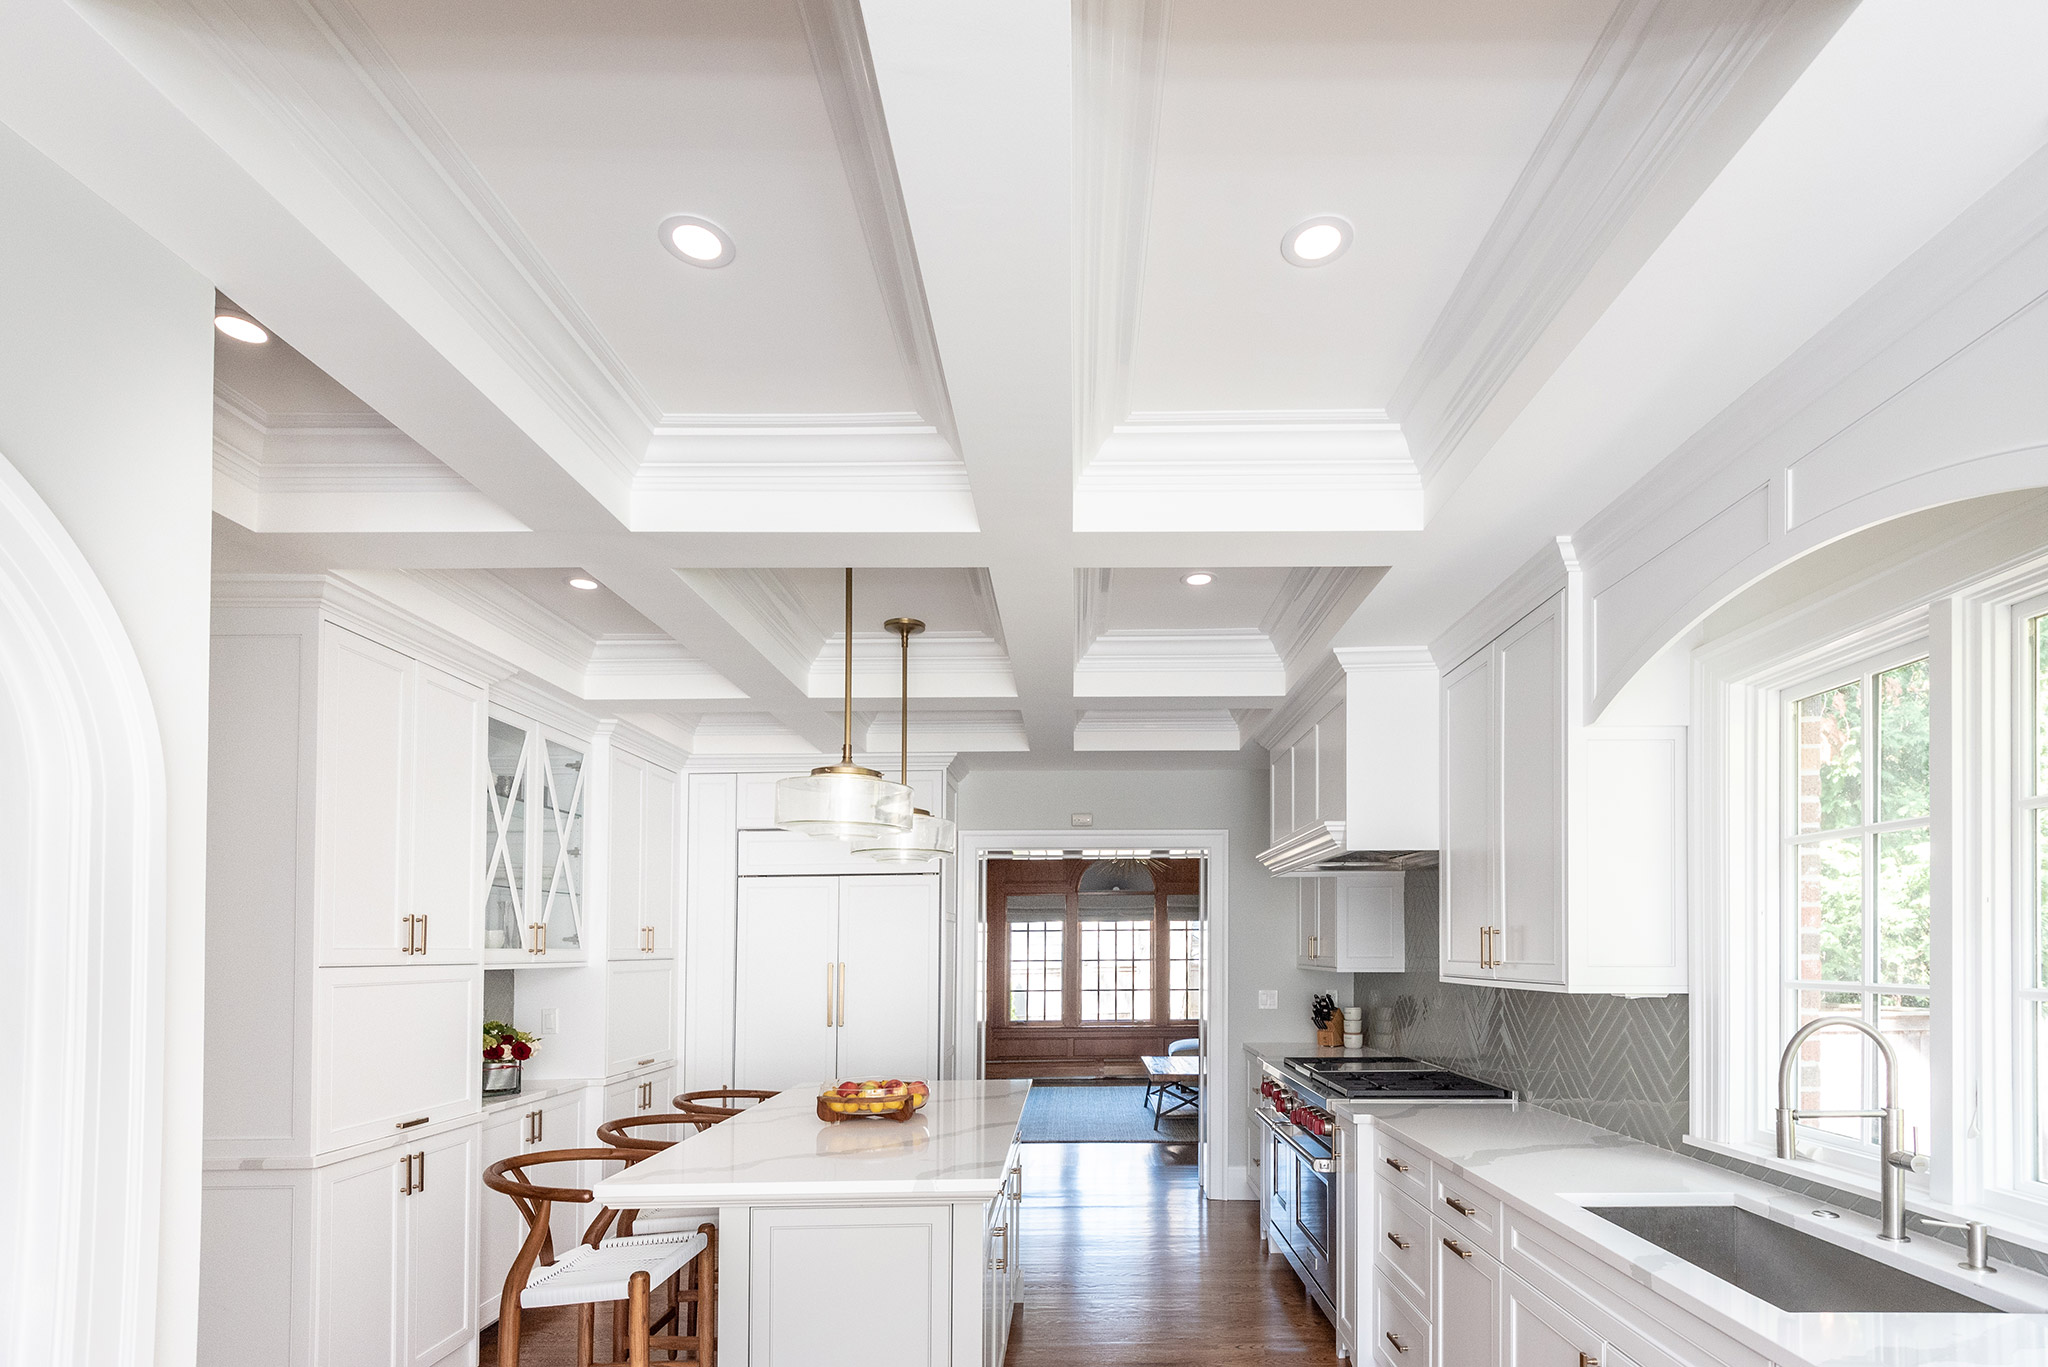 A bright and classic kitchen design with a modern twist, featuring white cabinets, a gray tile backsplash, and a coffered ceiling.